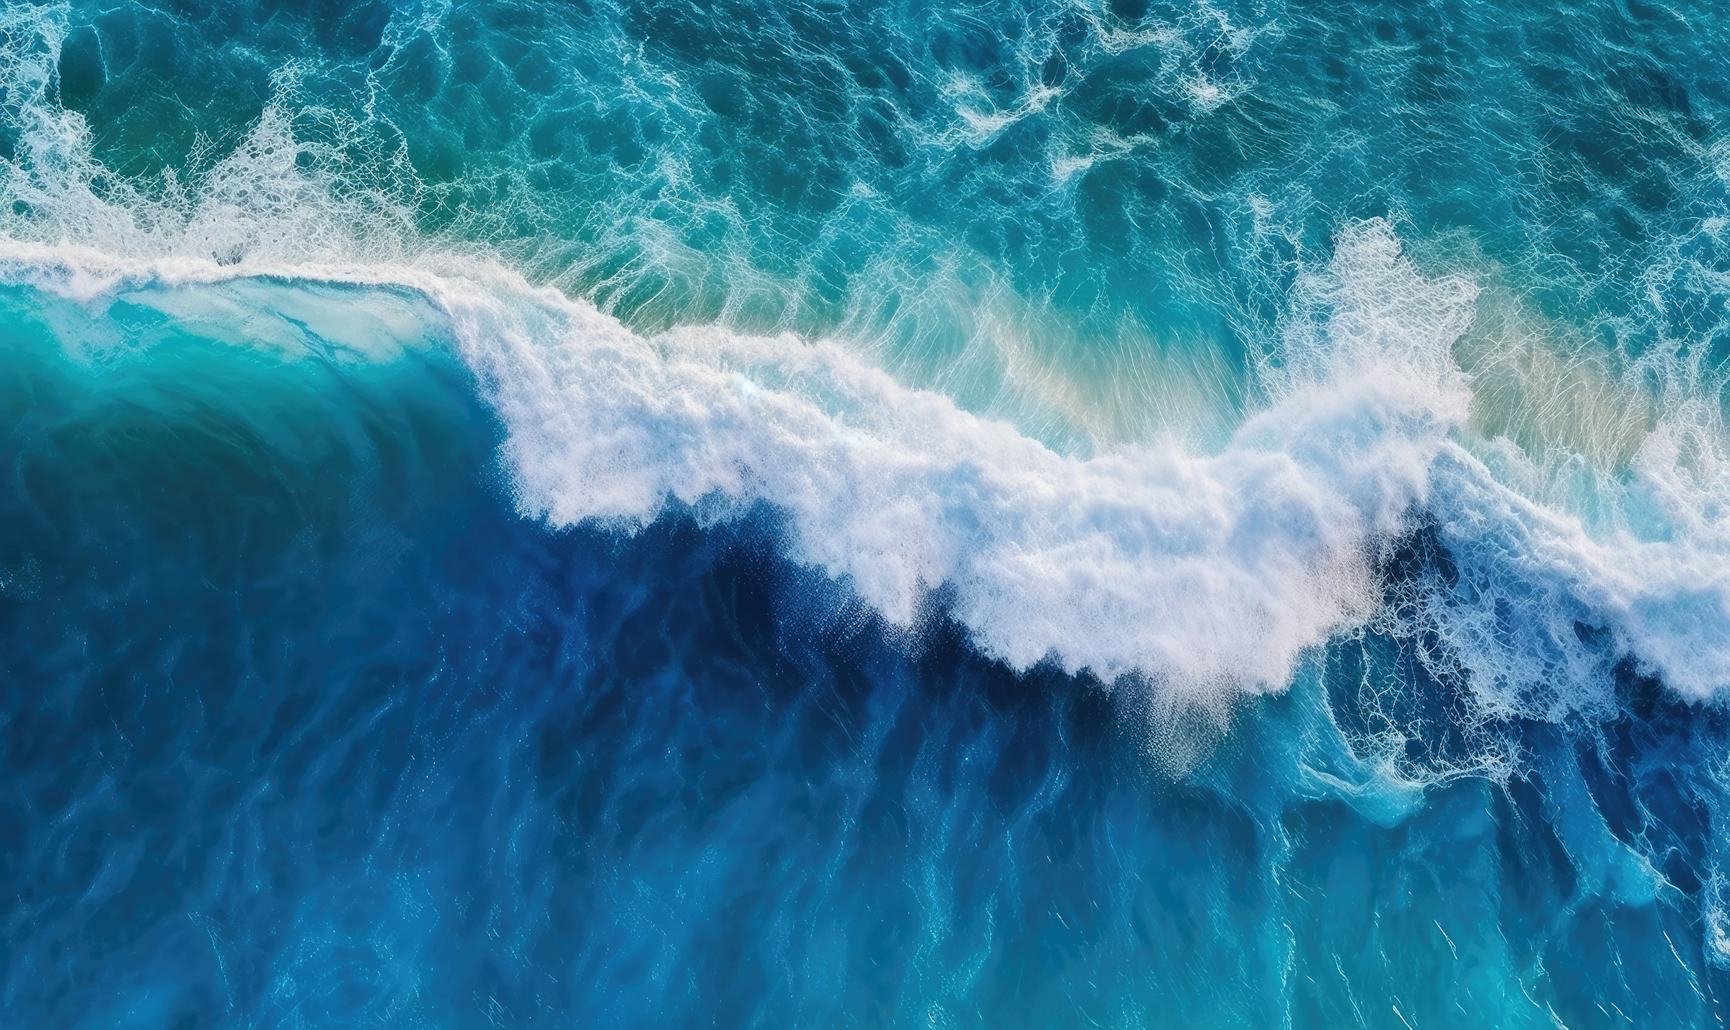 Bright blue ocean wave crashing against another wave